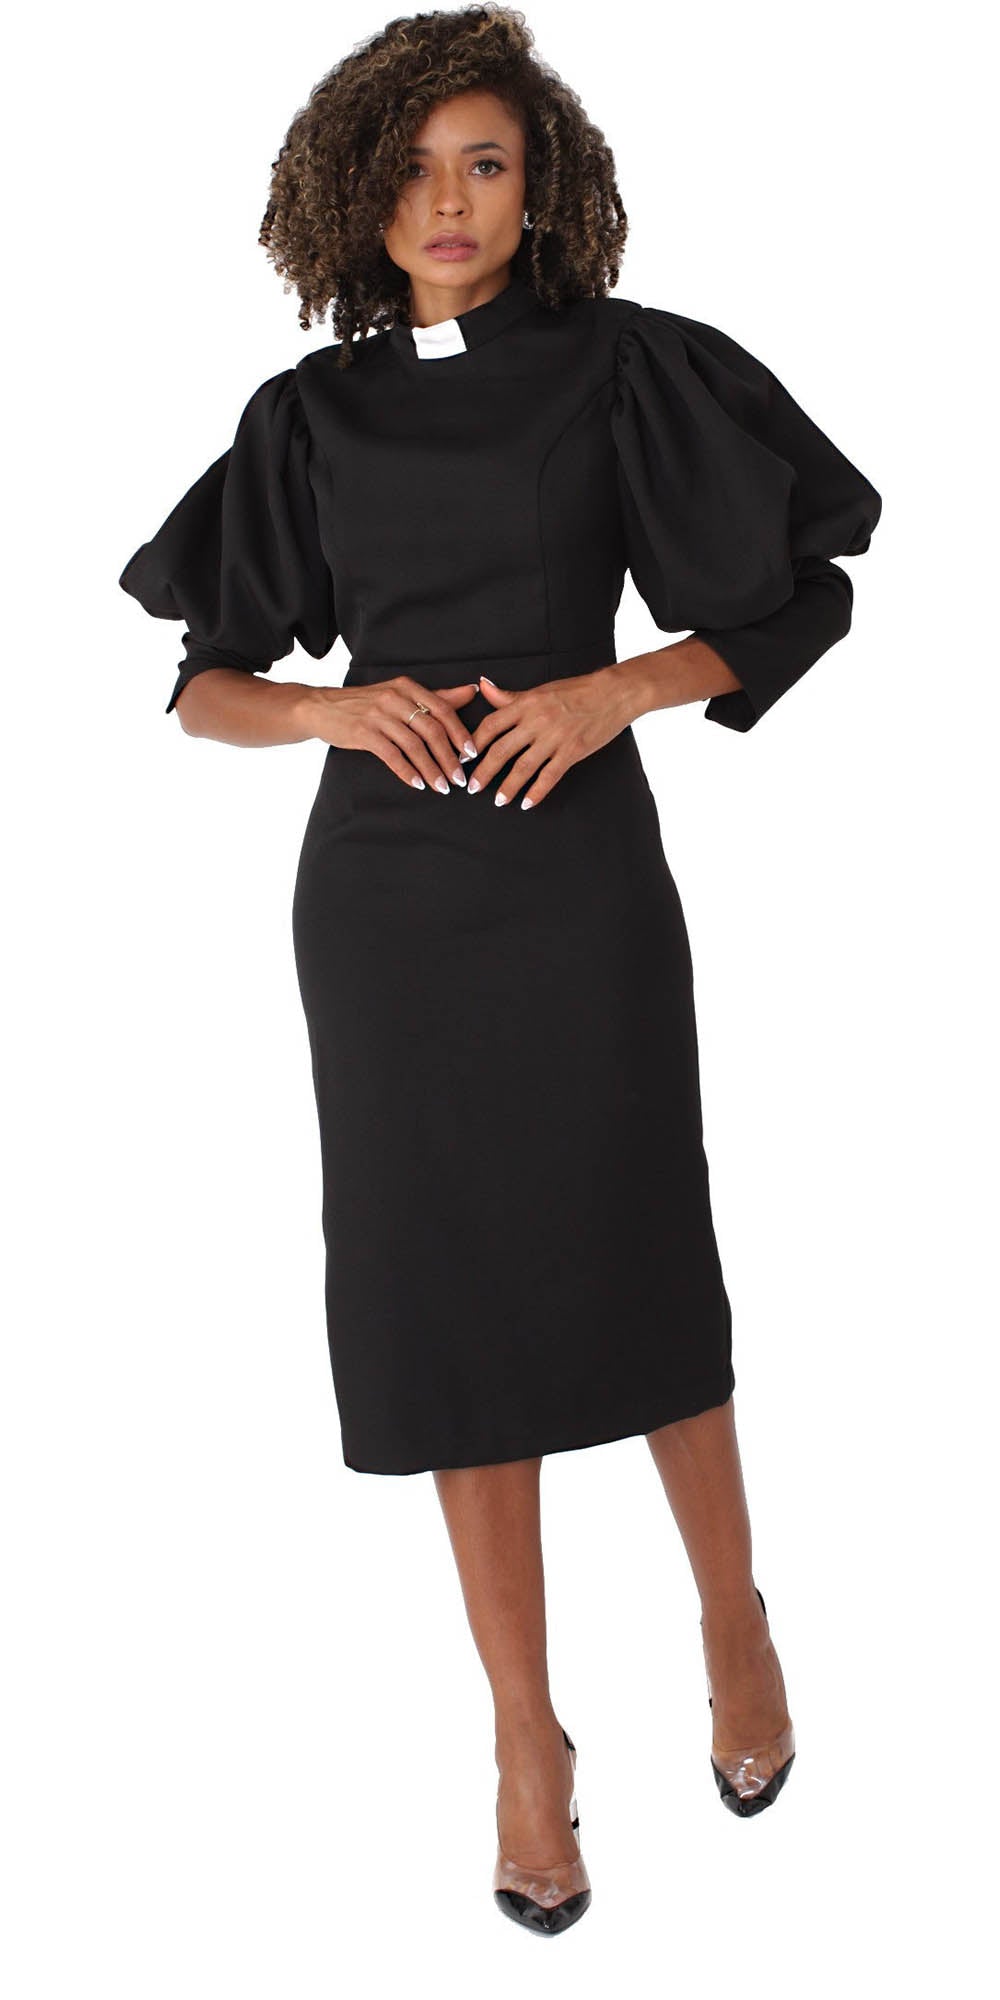 Tally Taylor - 4813 - Black White - Women's Clergy Dress With Puff Sleeves